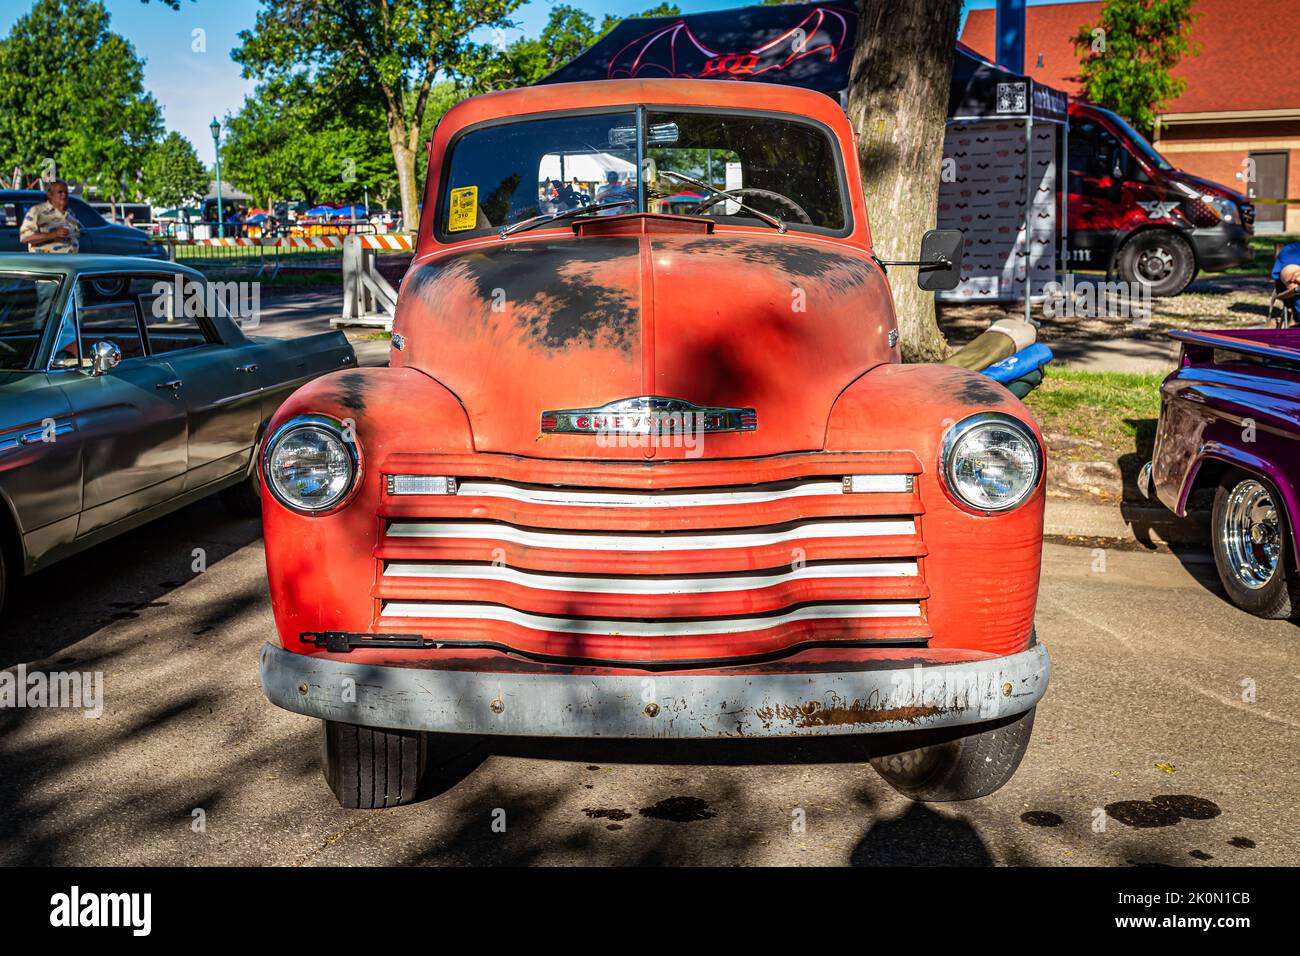 Falcon Heights, MN - June 18, 2022: High perspective front view of a 1952 Chevrolet 3100 Pickup Truck at a local car show. Stock Photo